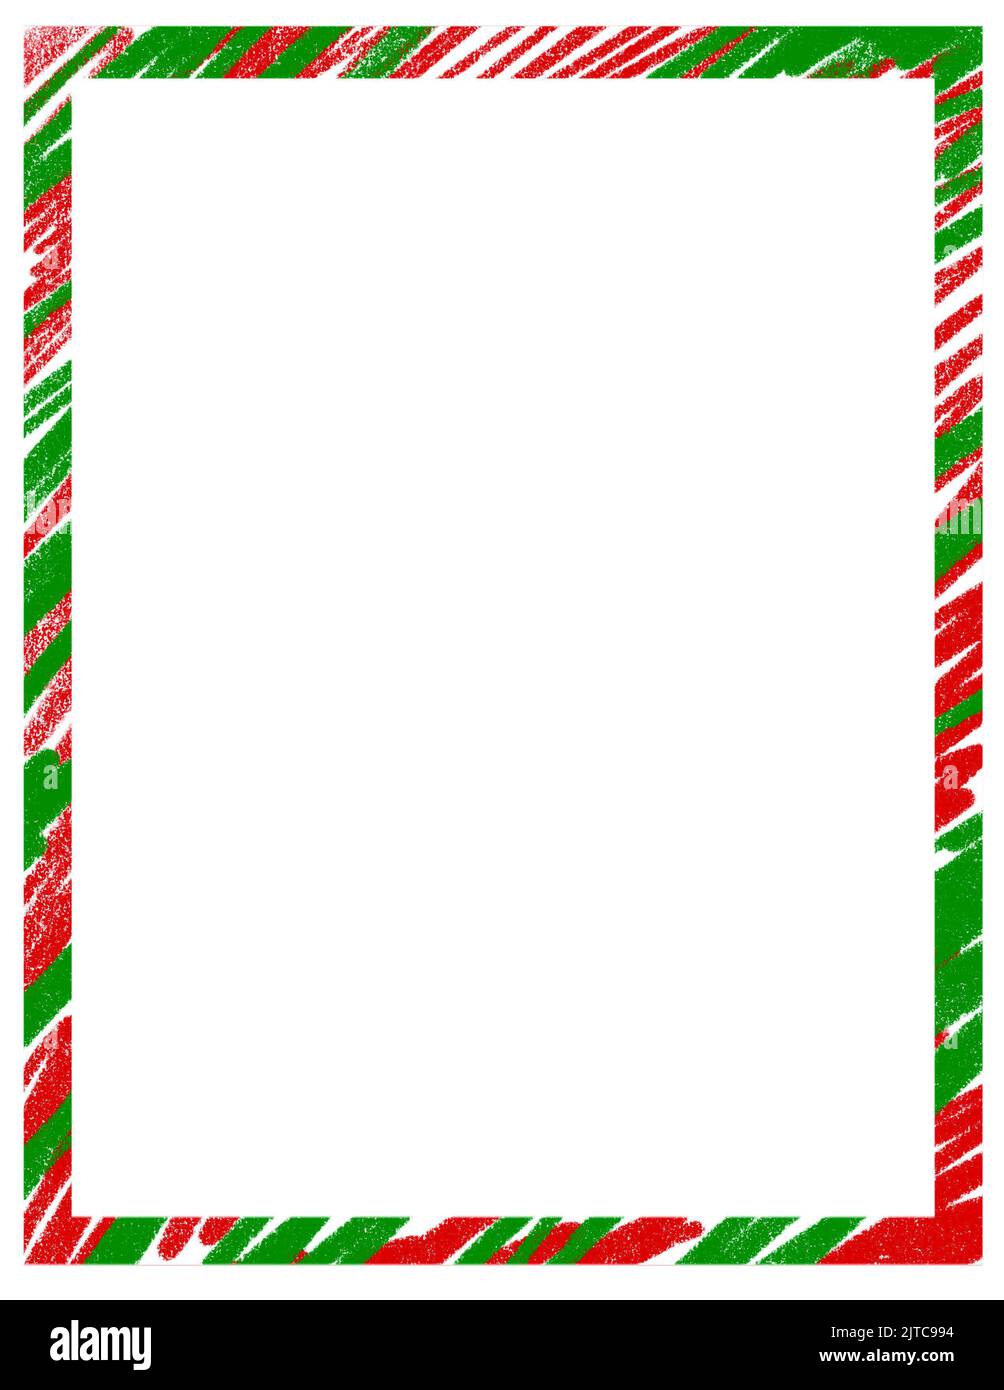 Hand drawn Christms frame with red green traditional ornaments and empty copyspace. December winter xmas decoration border, season holiday decor edge design, simple minimalist style doodle cartoon Stock Photo